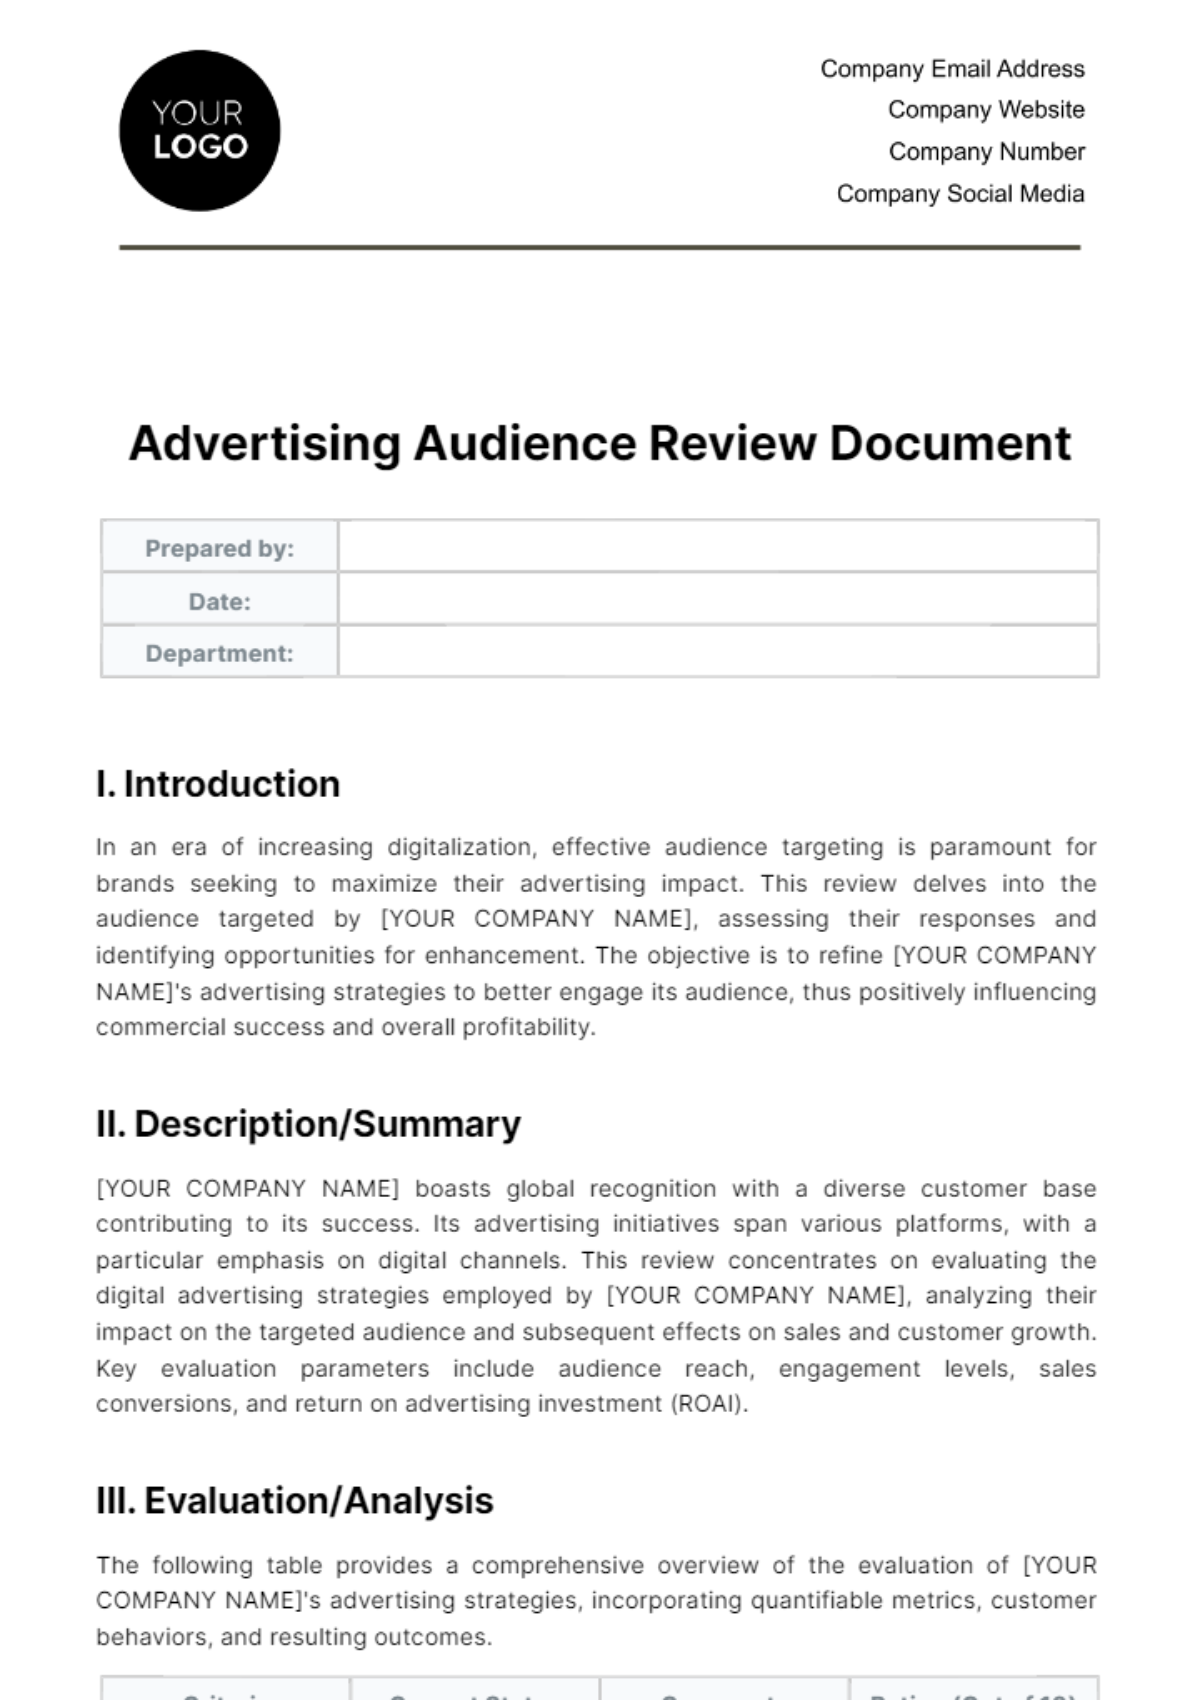 Free Advertising Audience Review Document Template